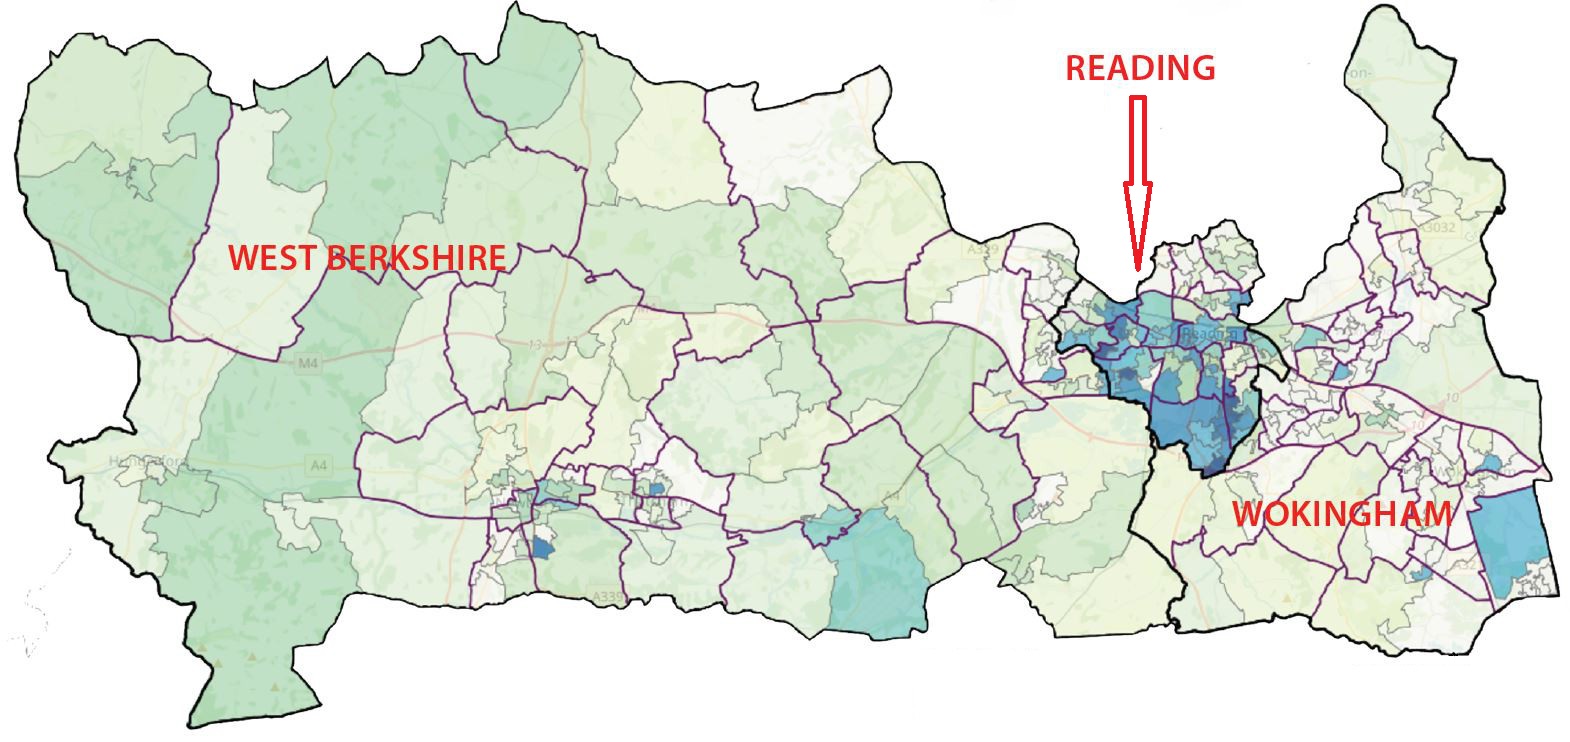 Colour coded map showing areas of greatest and least deprivation in West Berkshire, Reading and Wokingham. Reading has the most areas of high deprivation and West Berkshire has a couple.